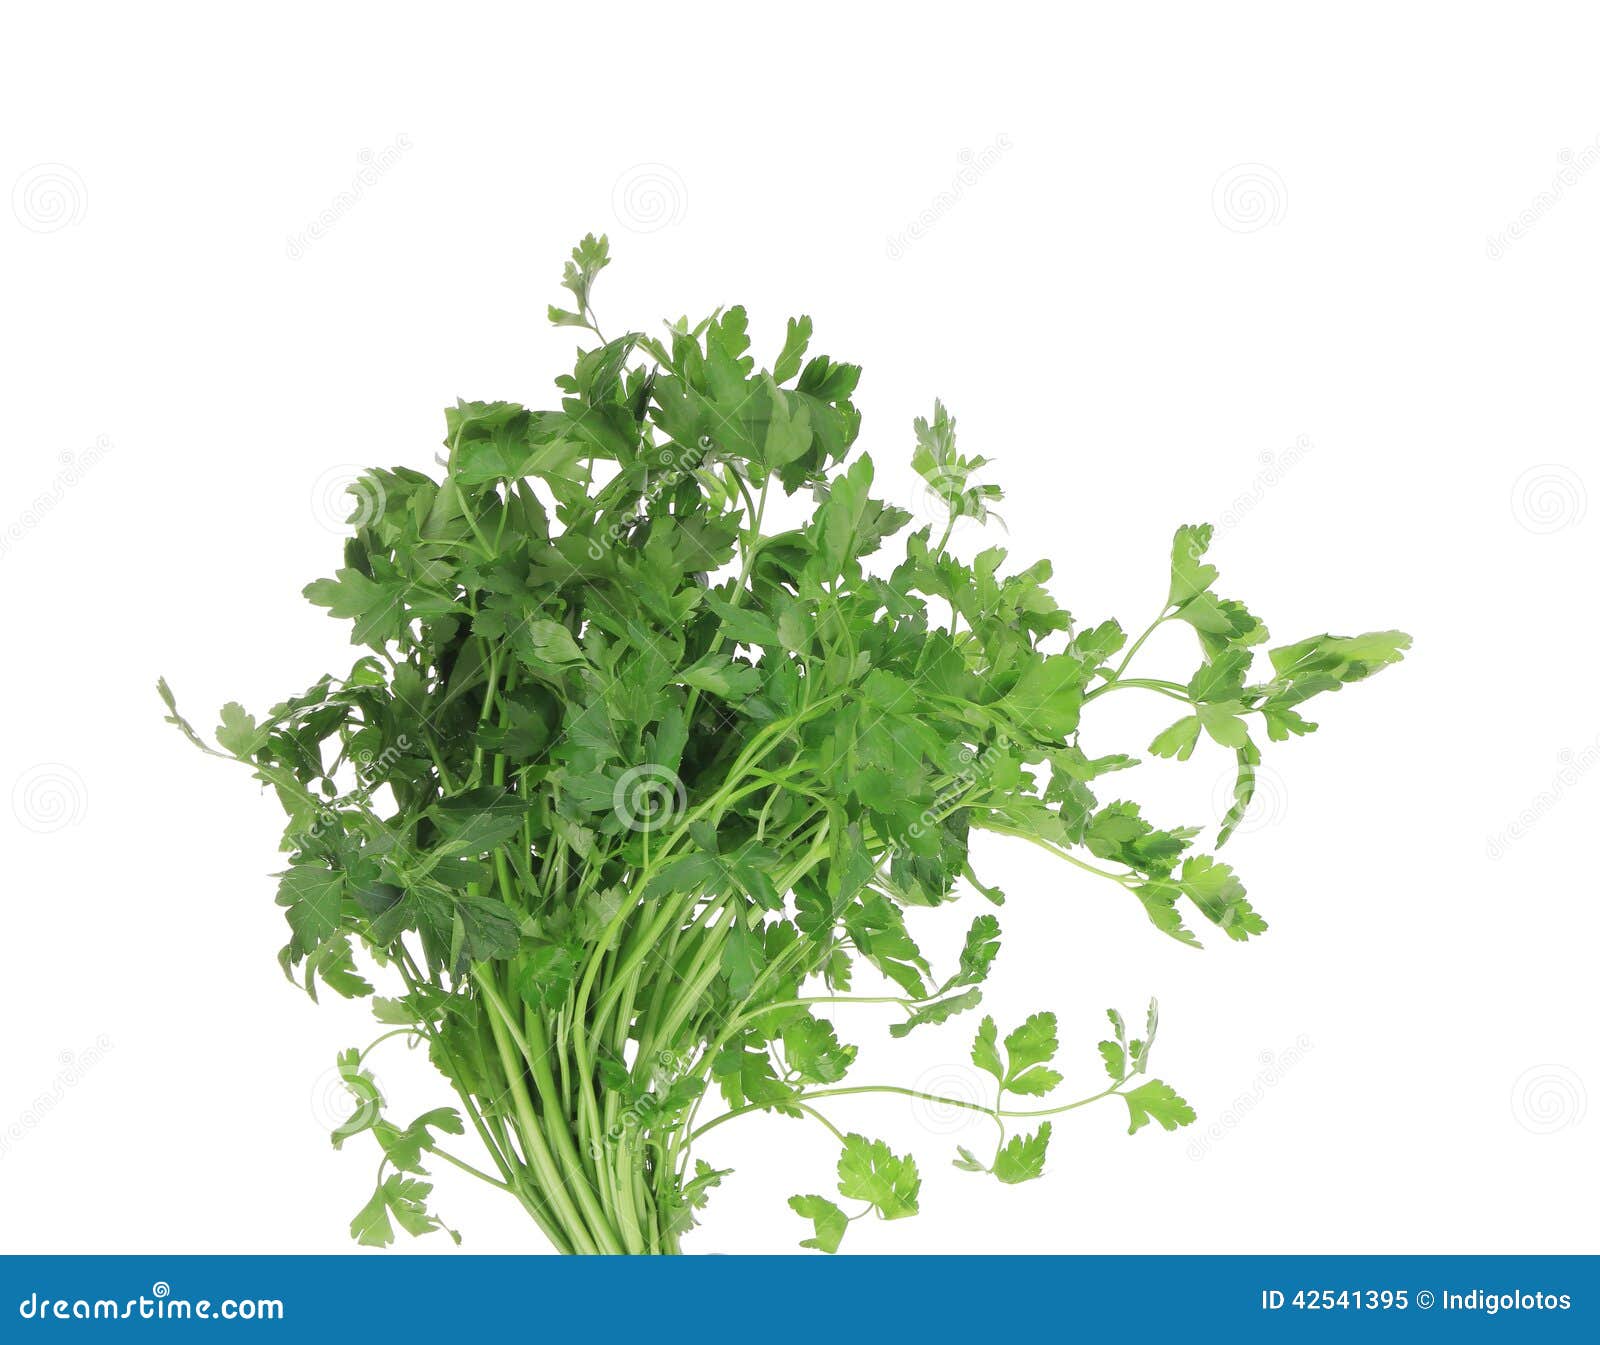 Bunch of parsley on a white. Isolated on a white background.